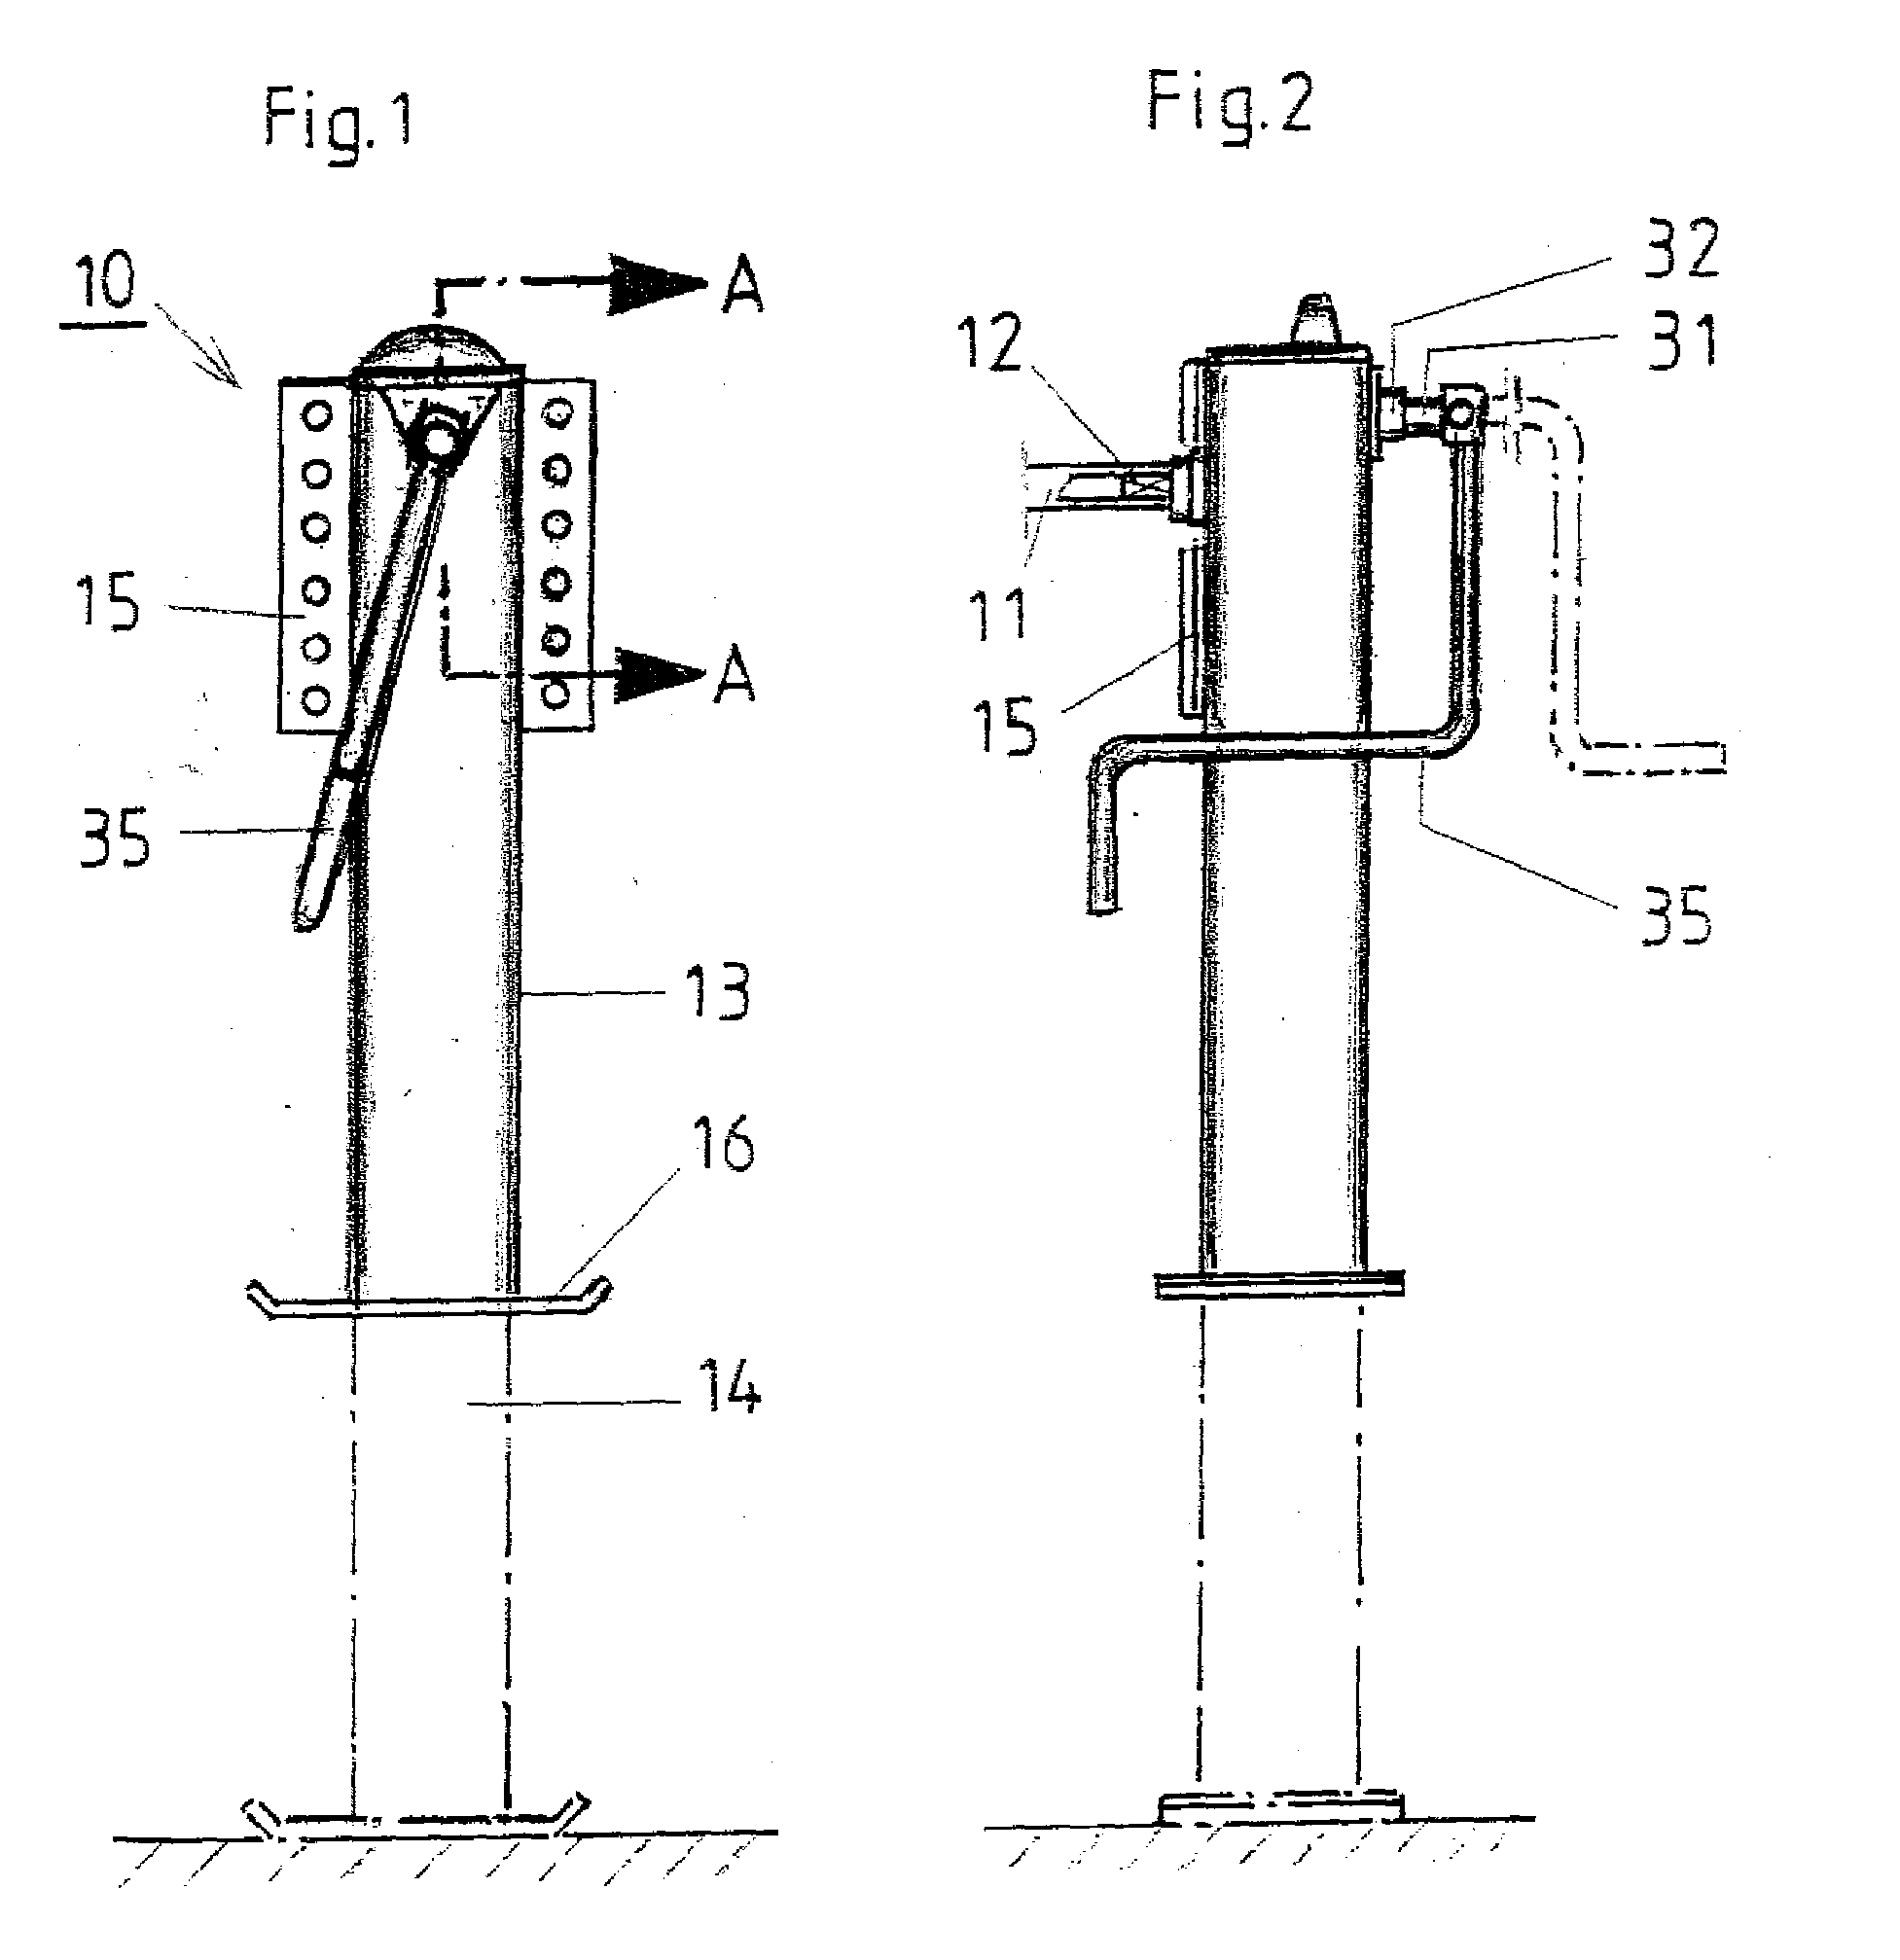 Height-adjustable support for semitrailers or the like